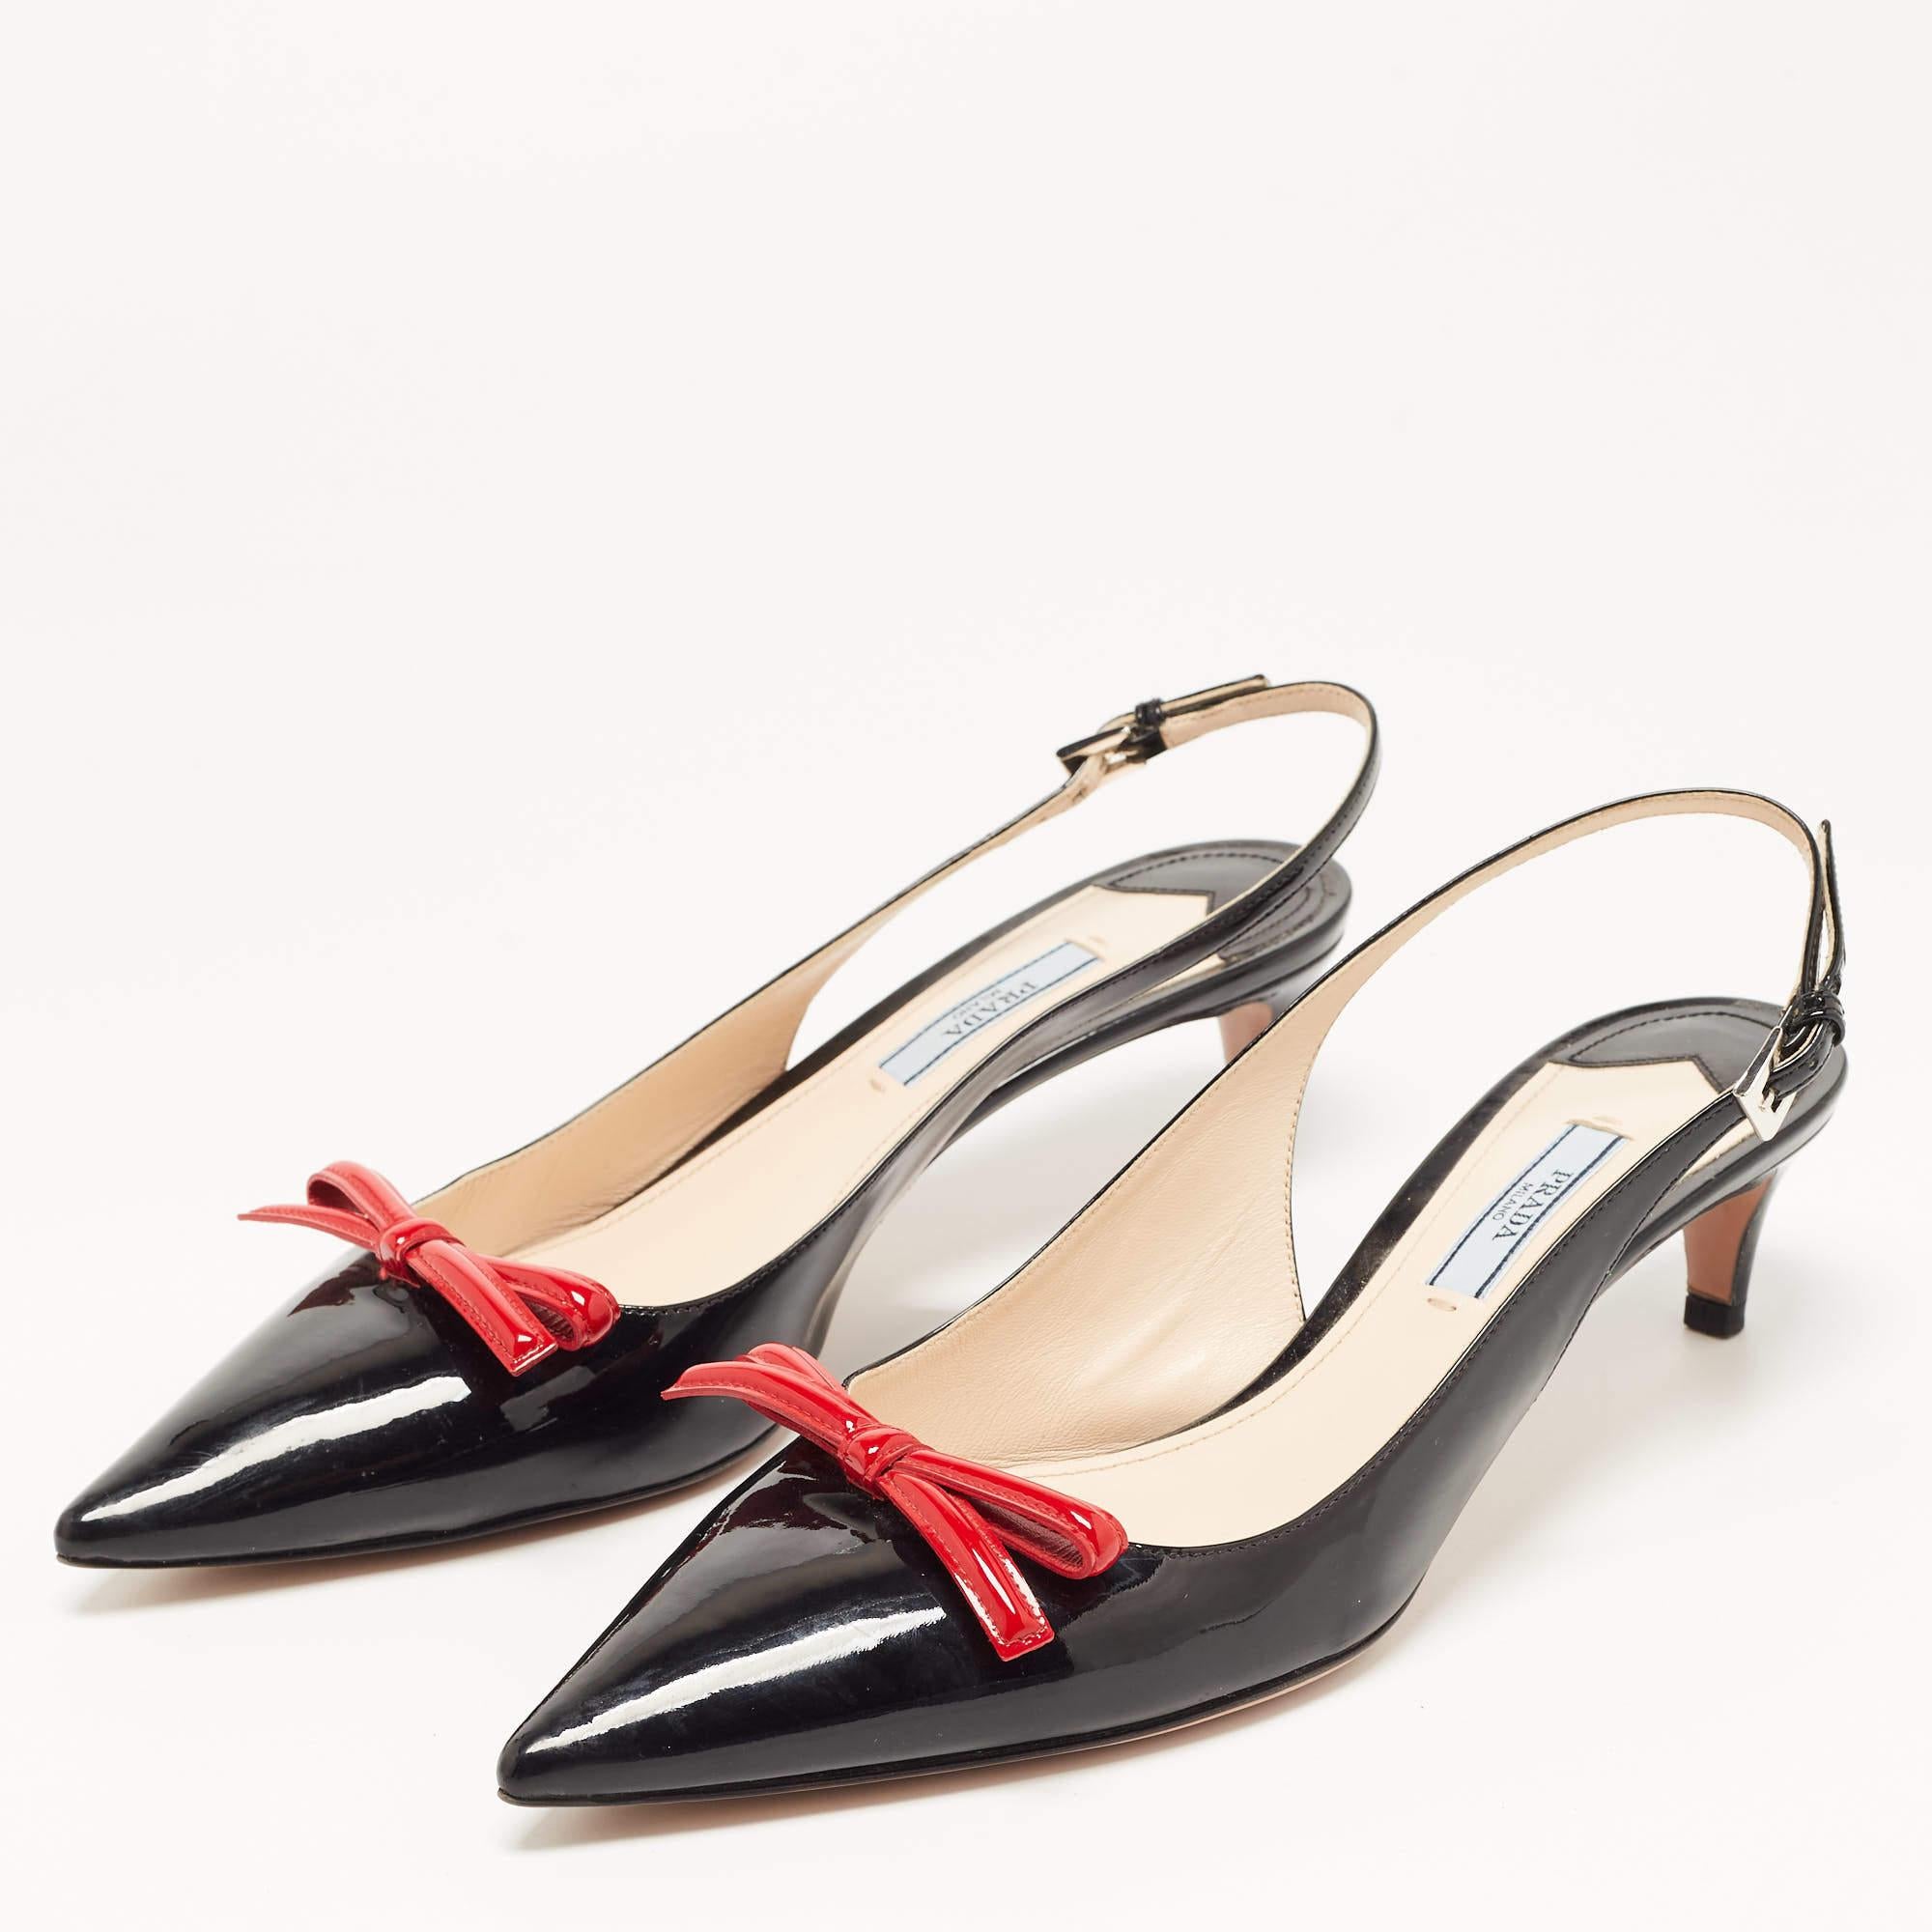 Women's Prada Black/Red Patent Leather Bow Pointed Toe Slingback Sandals Size 40.5